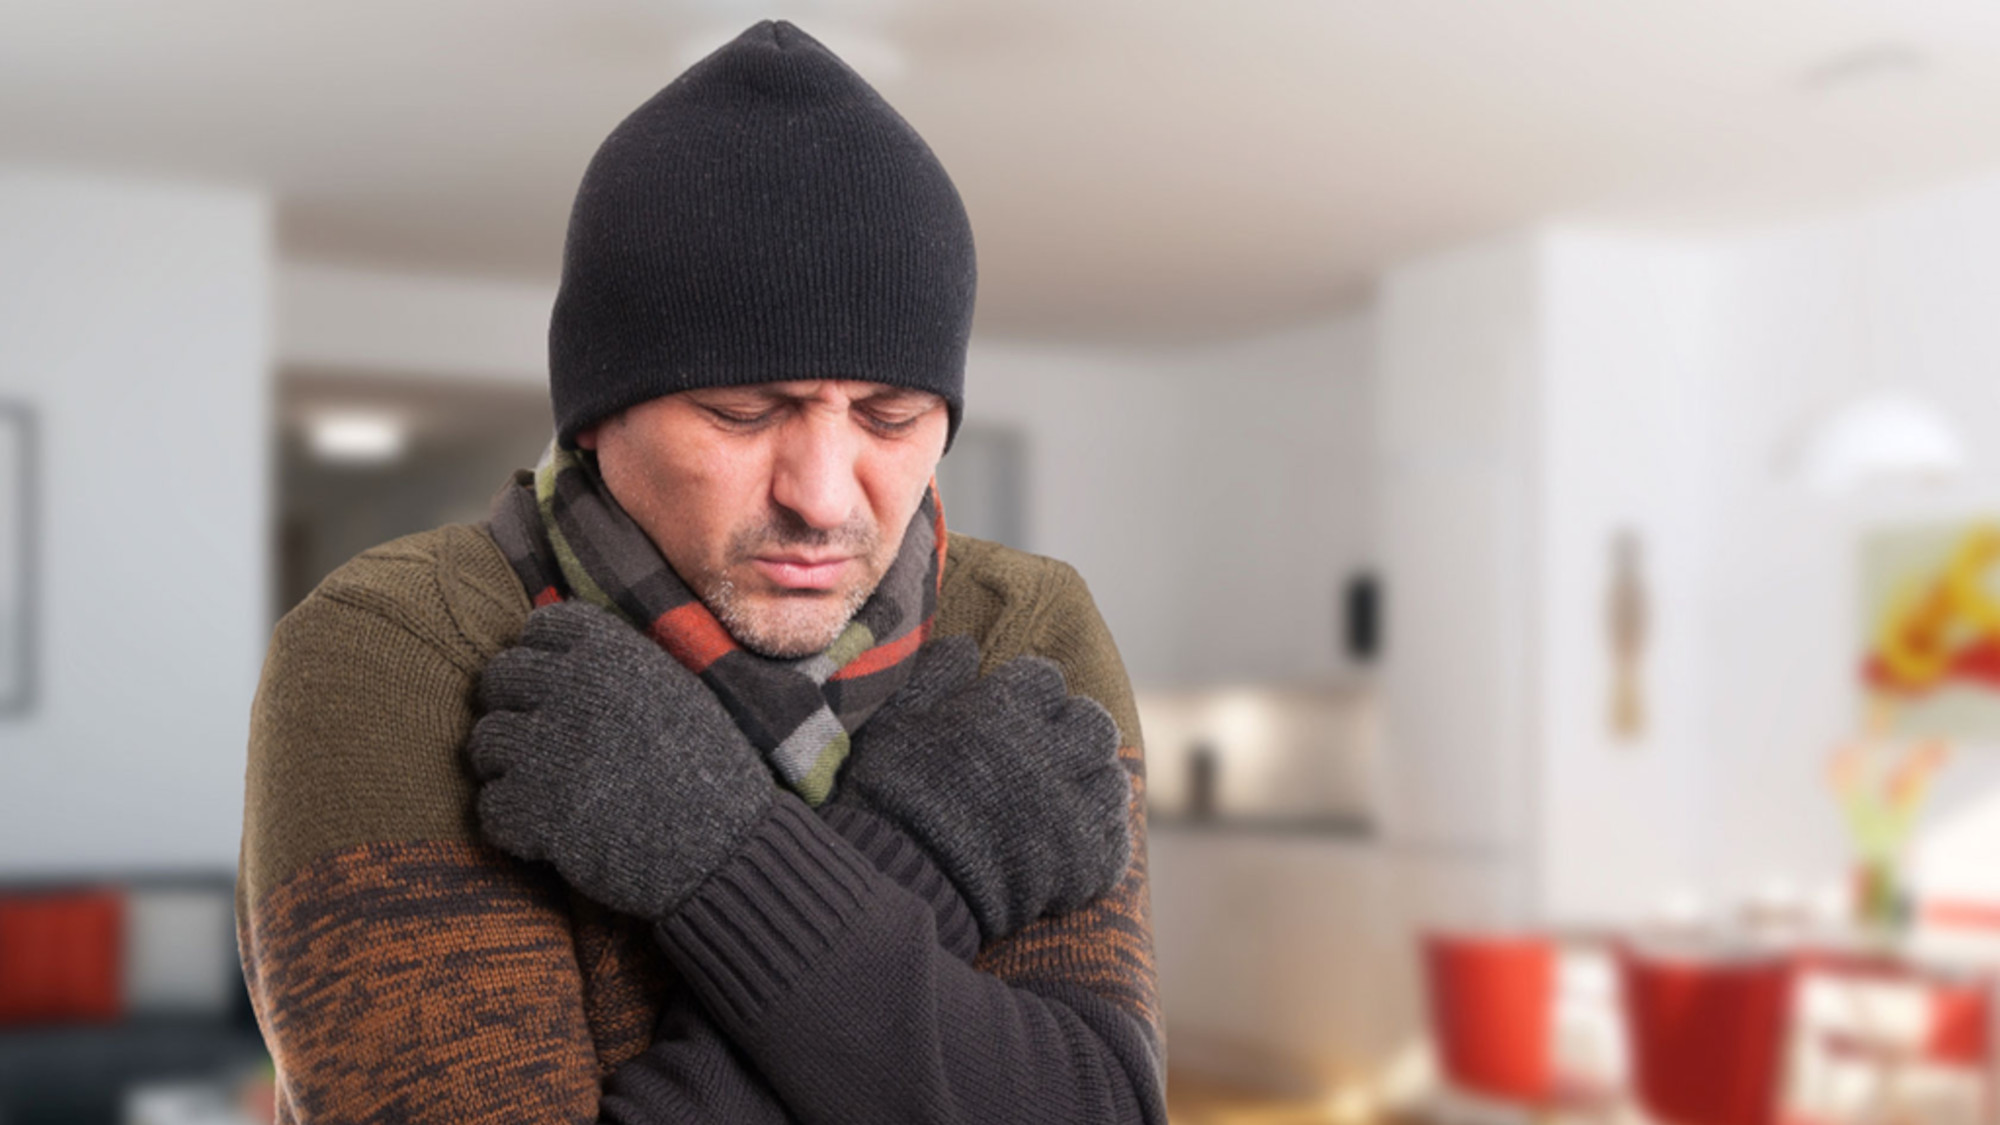 A man in a scarf and hat stands freezing in the living room, hugging himself.